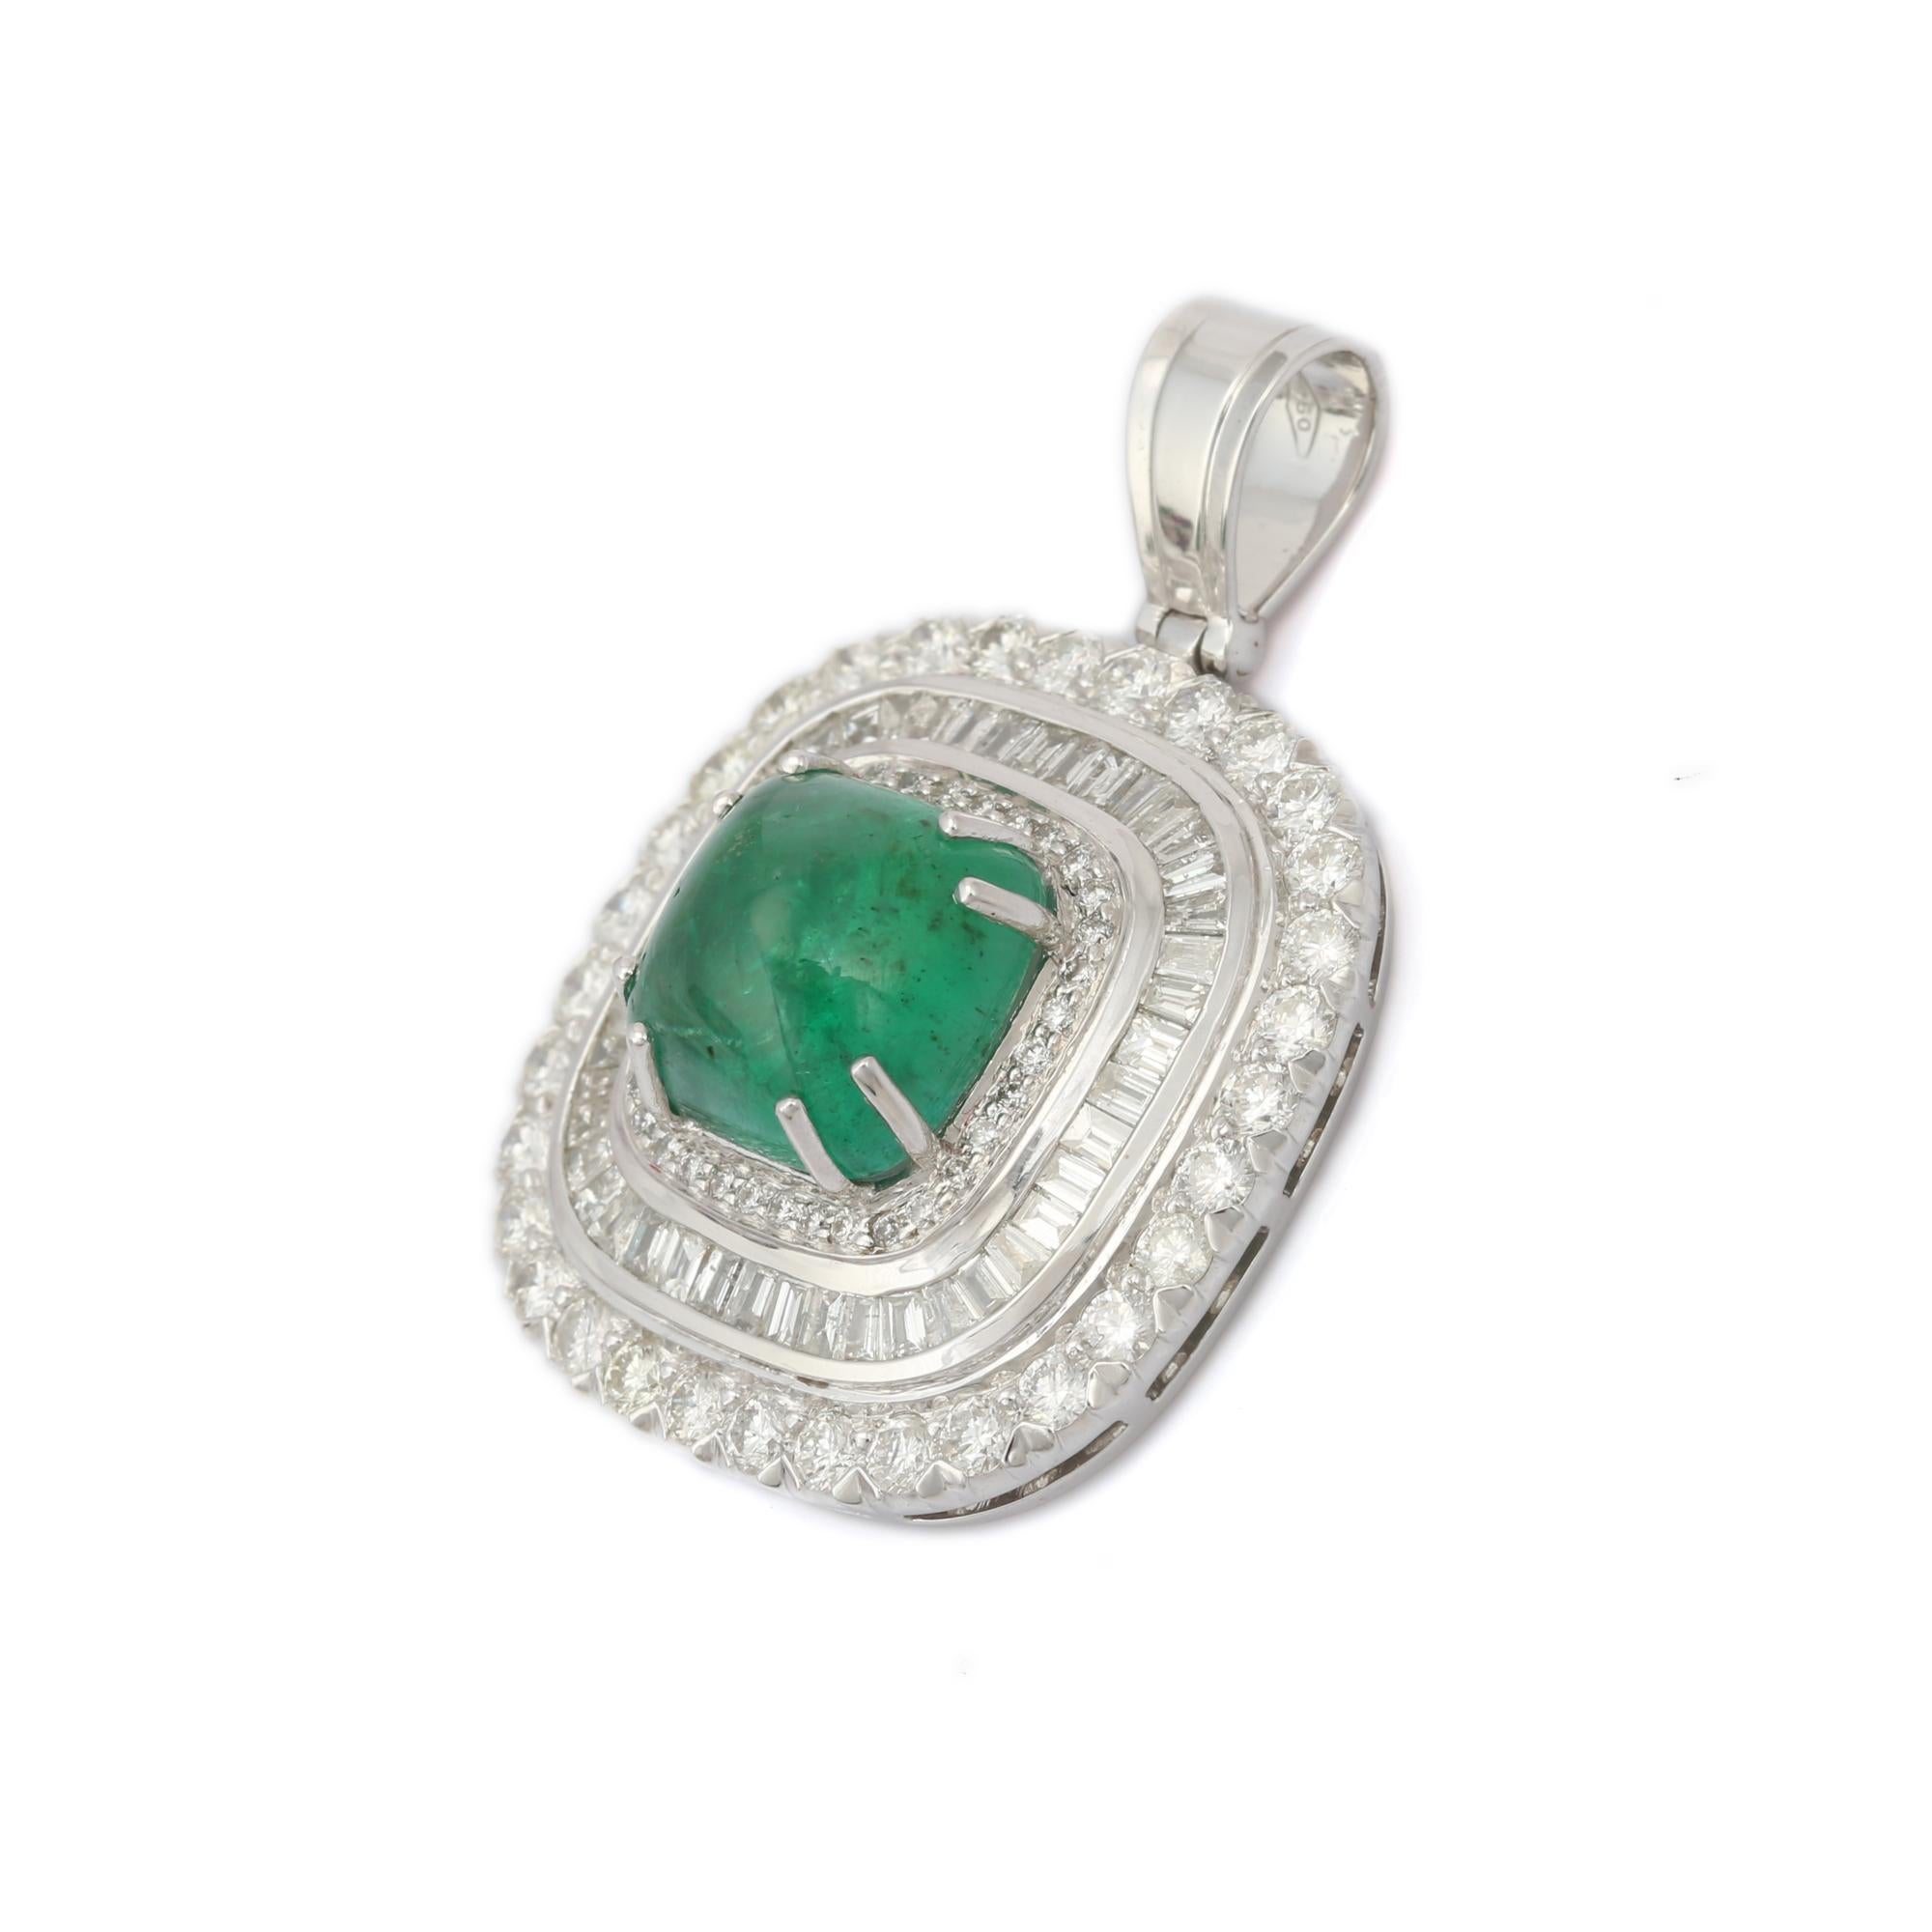 Regal Halo Diamond Emerald Pendant in 18K Gold studded in white gold settings. This stunning piece of jewelry instantly elevates a casual look or dressy outfit. 
Emerald enhances the intellectual capacity of the person.
Designed with cushion cut